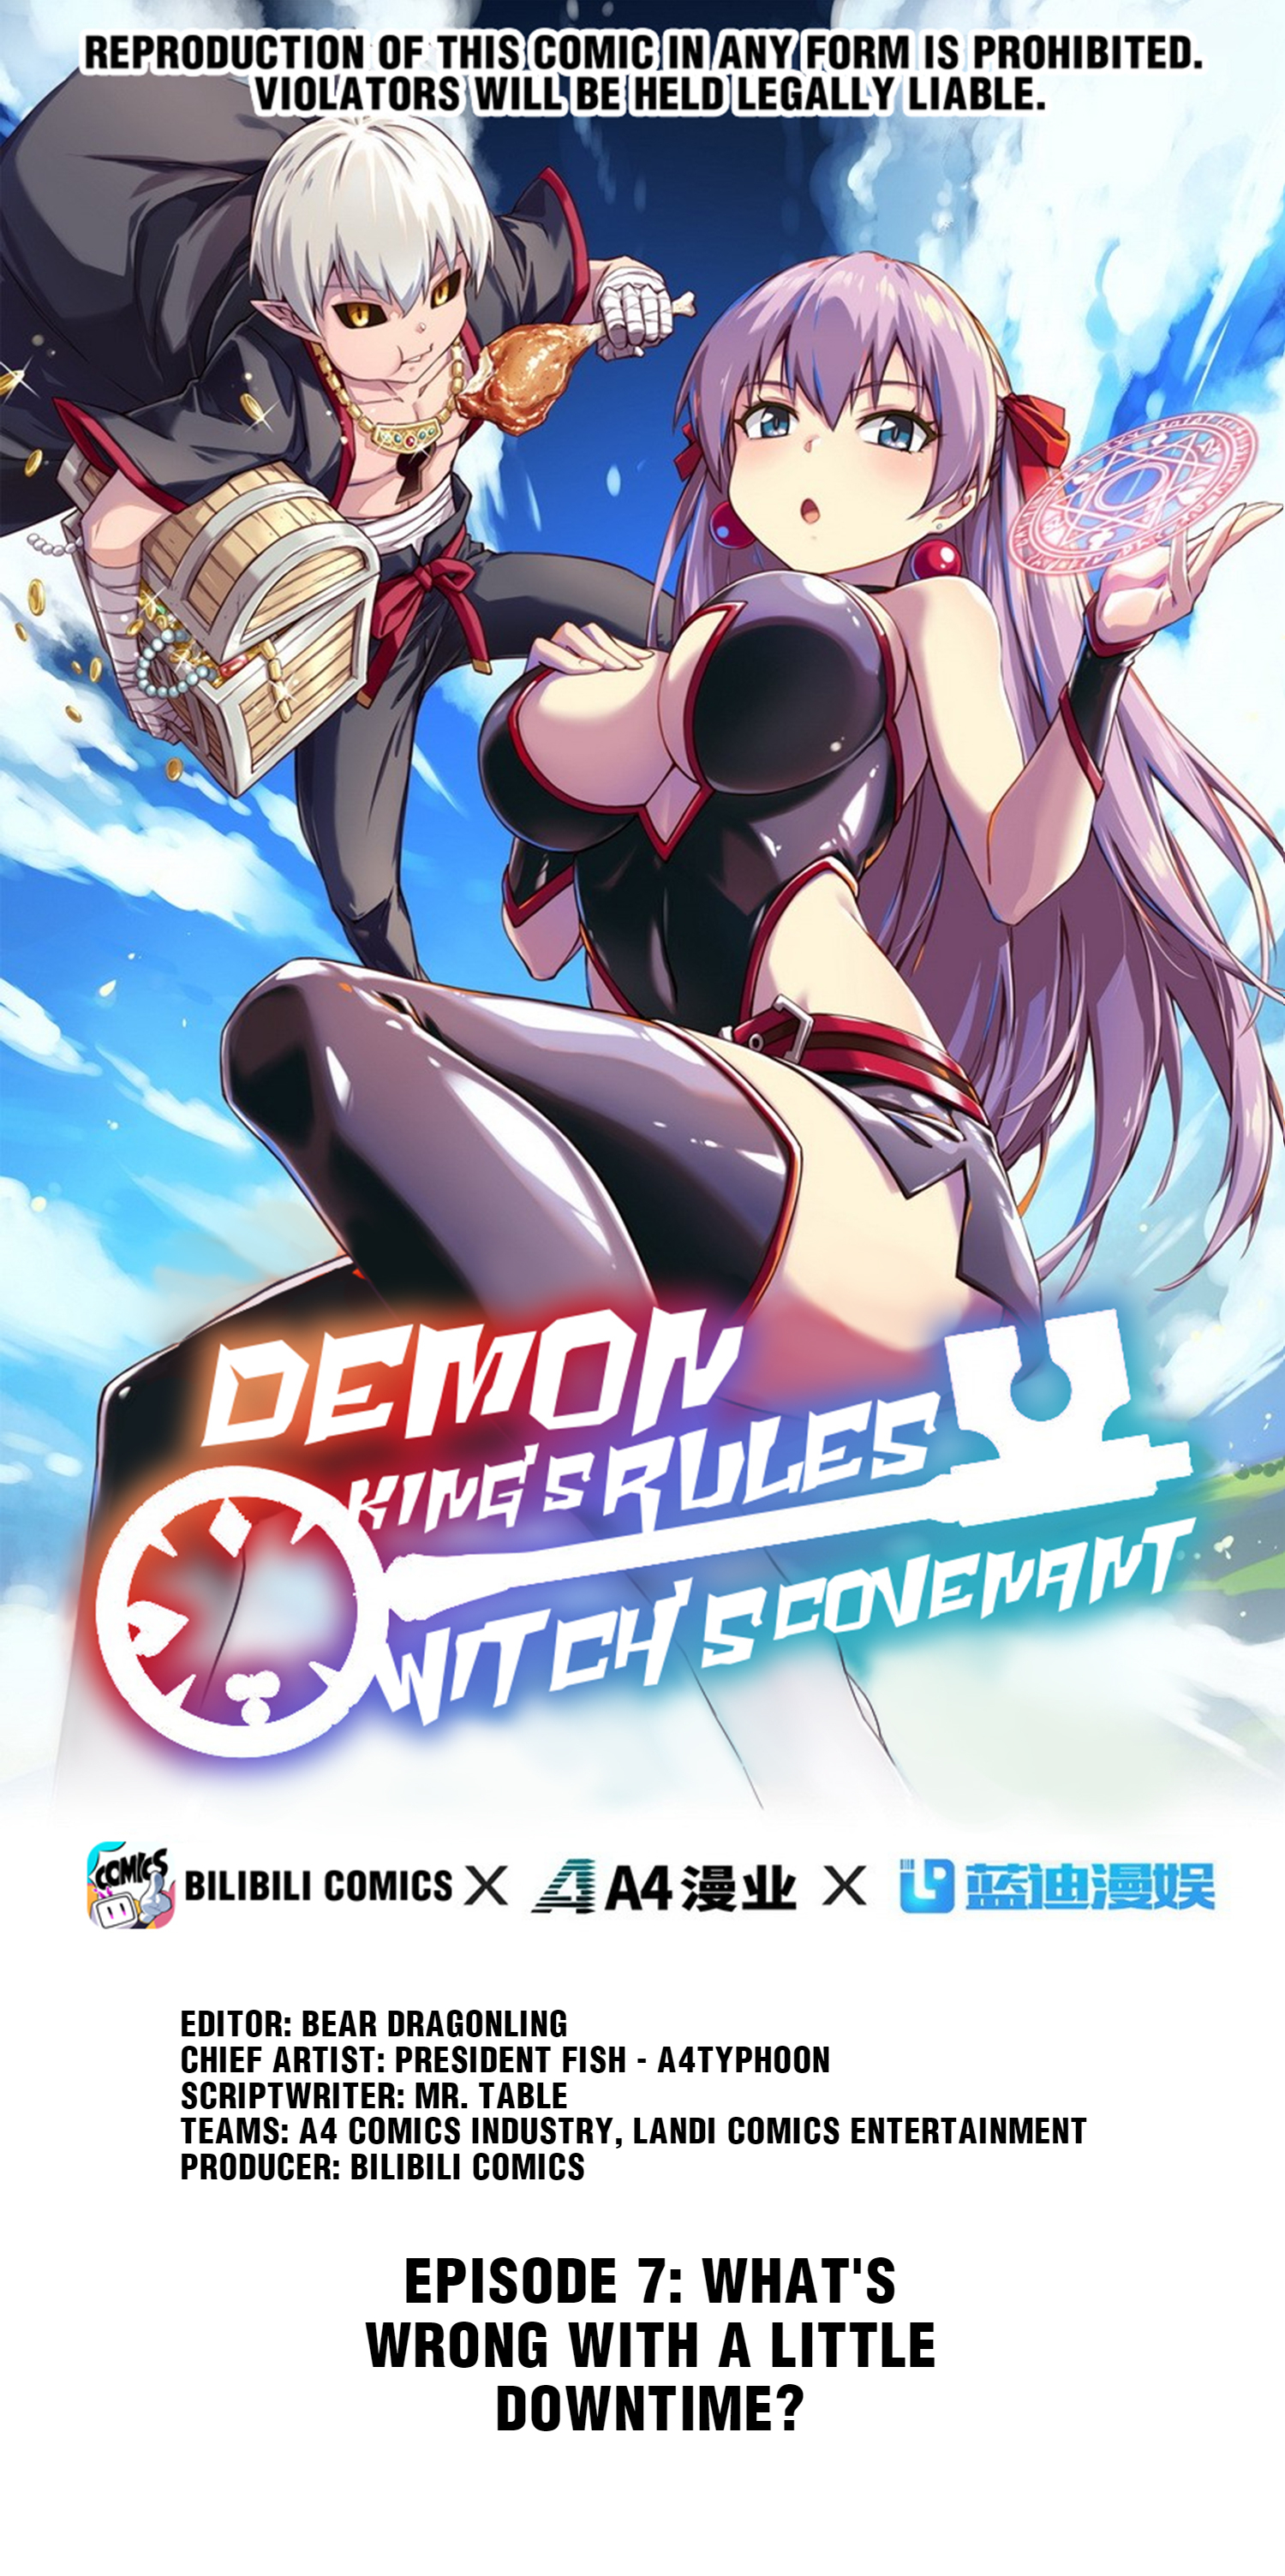 Demon King's Rules X Witch's Covenant Vol.1 Chapter 7.0